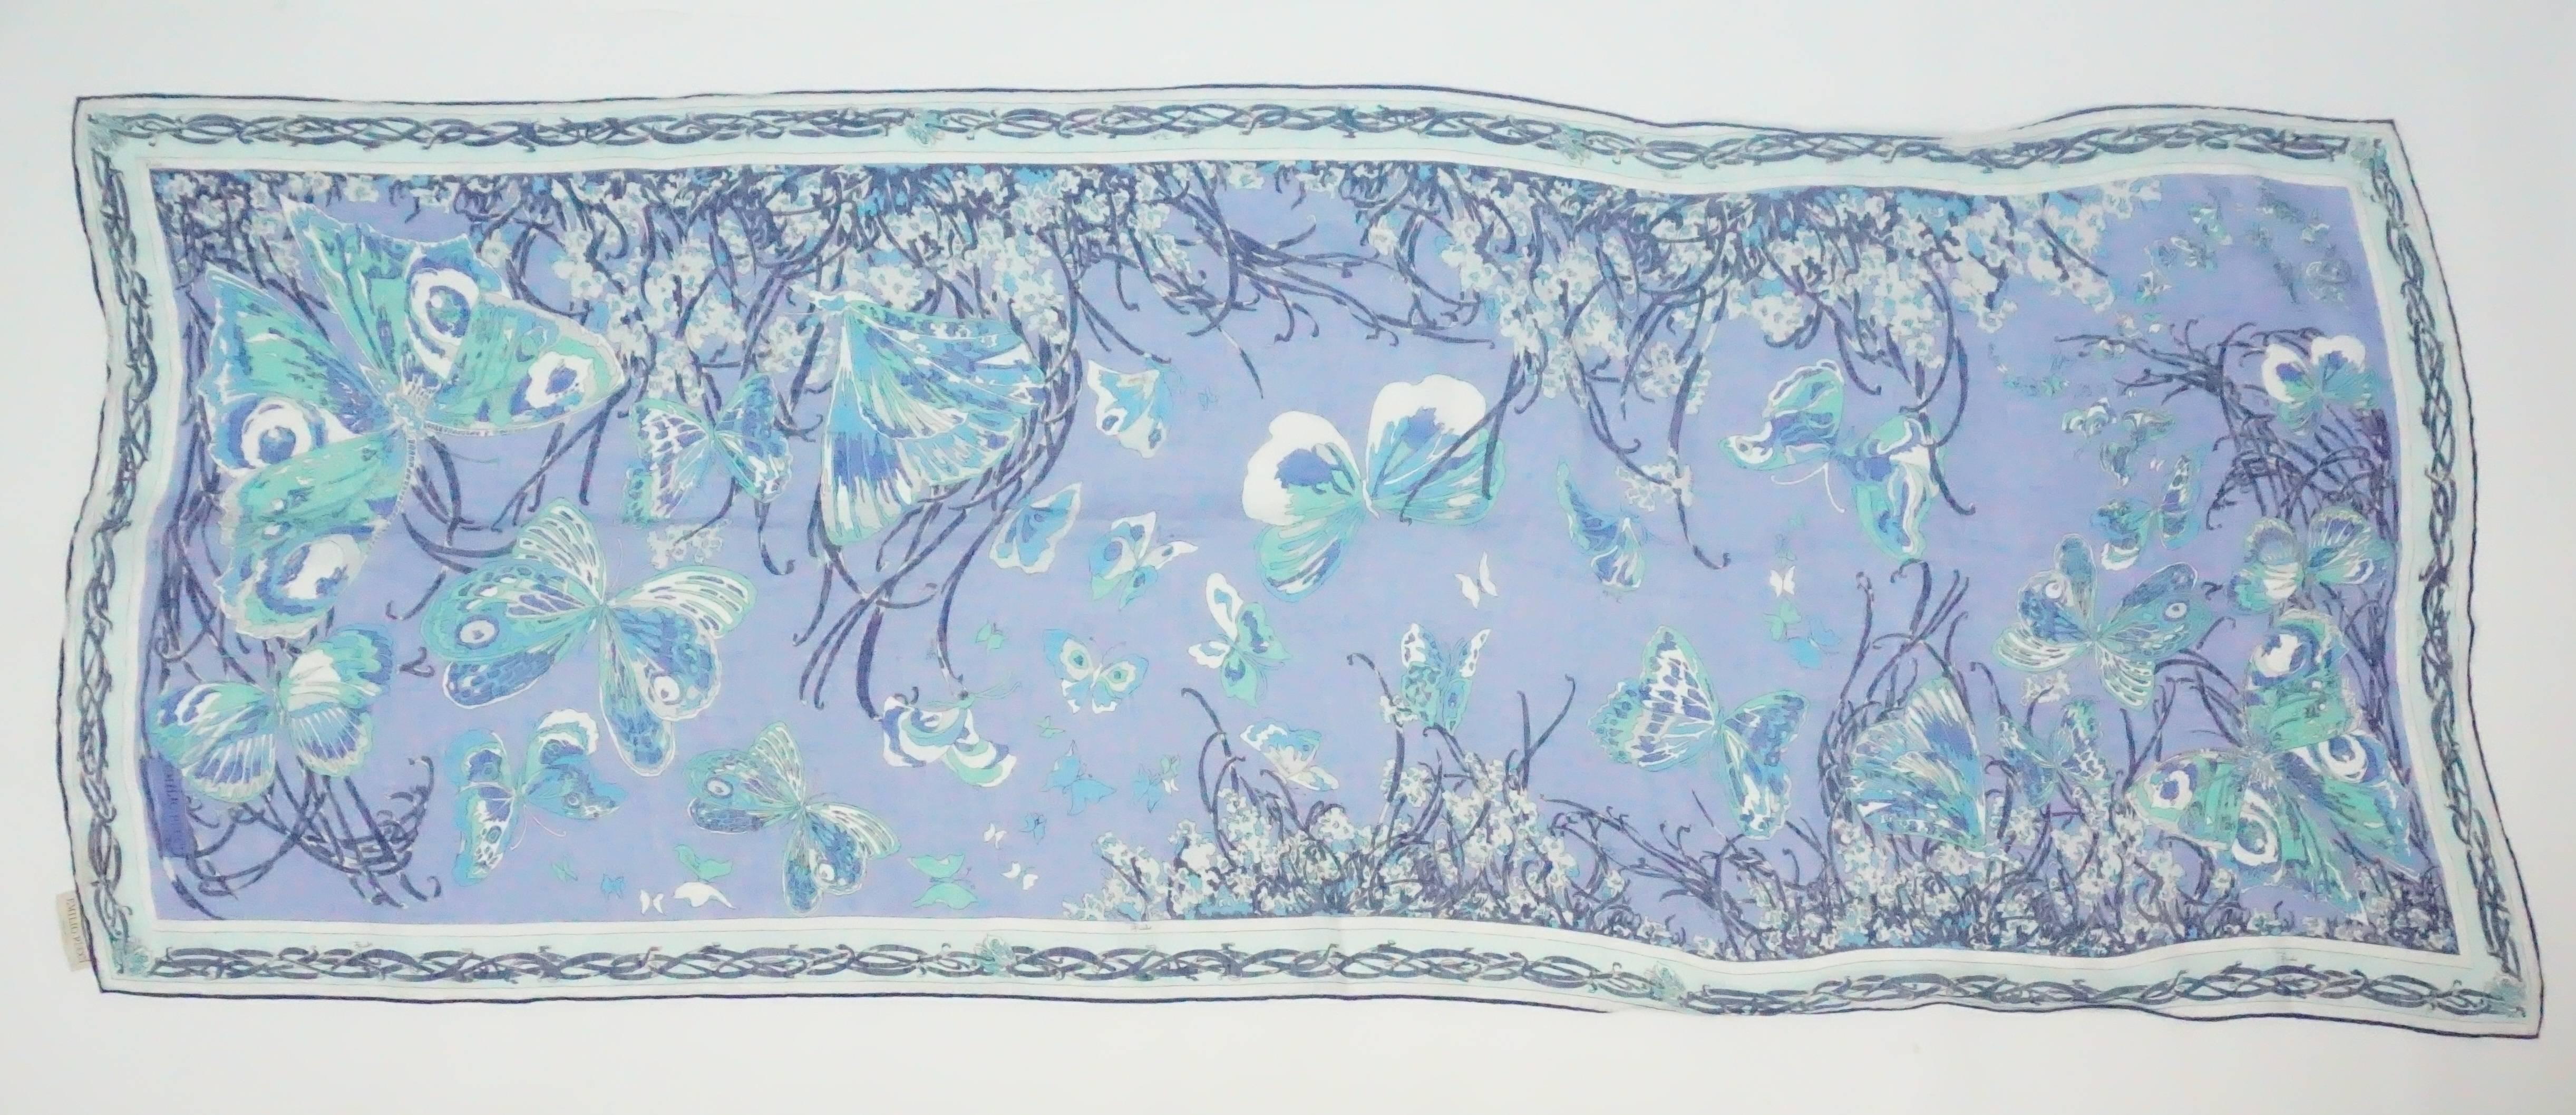 Emilio Pucci Blue Print Cotton Shawl  This Pucci cotton large scarf/shawl is made up of different shades of blues. There are butterfly shapes throughout the scarf and a boarder that contains a design of woven lines. This item is in good vintage